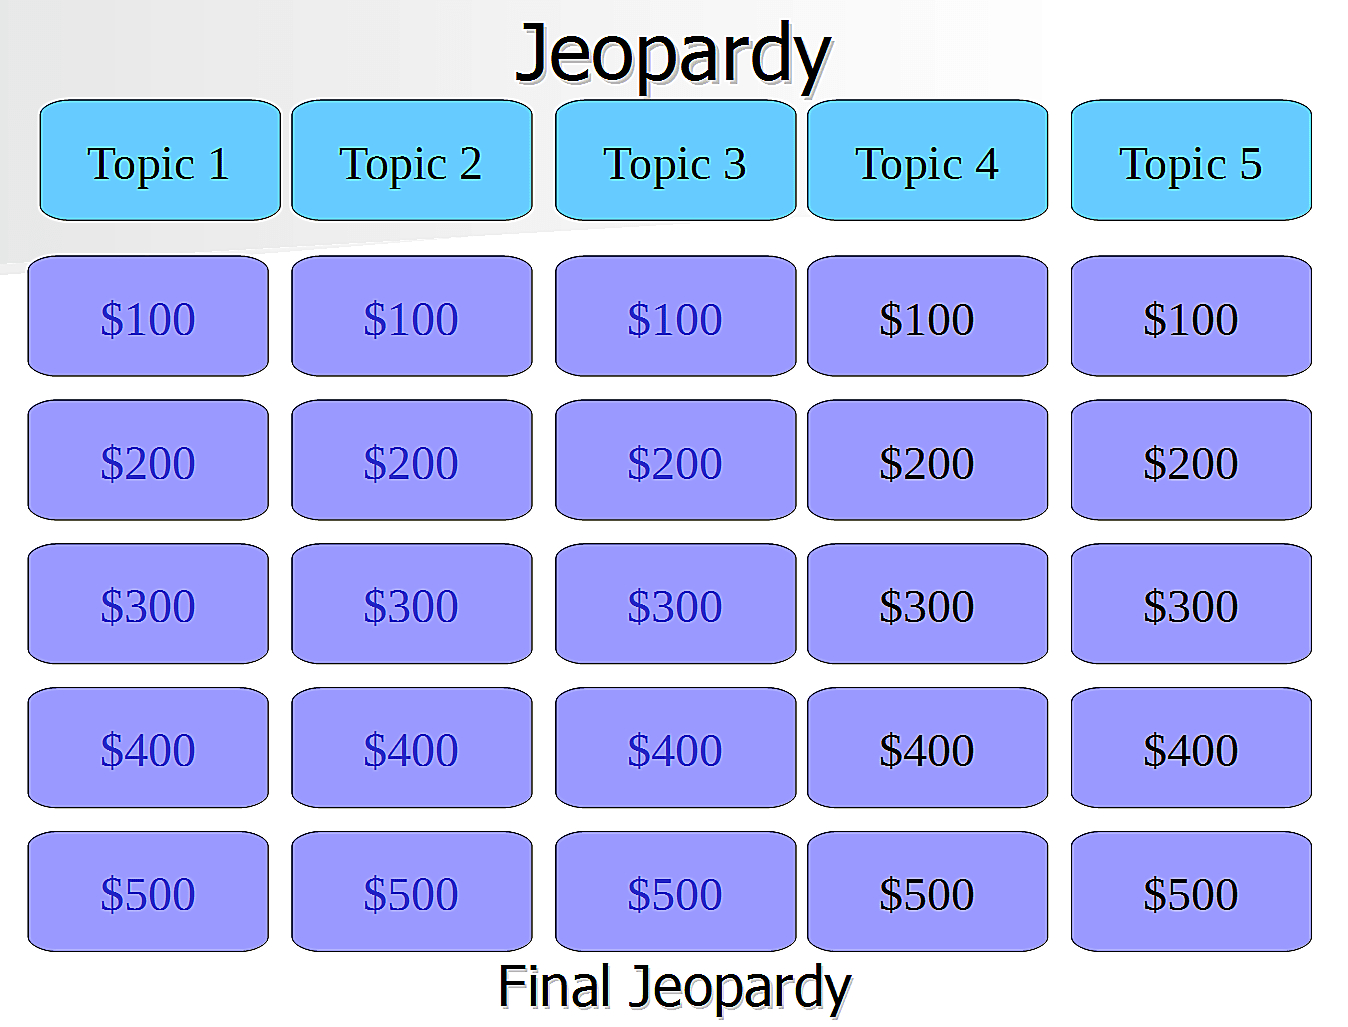 011 Jeopardy Game Template Ppt Score Powerpoint Net Promoter With Regard To Jeopardy Powerpoint Template With Score